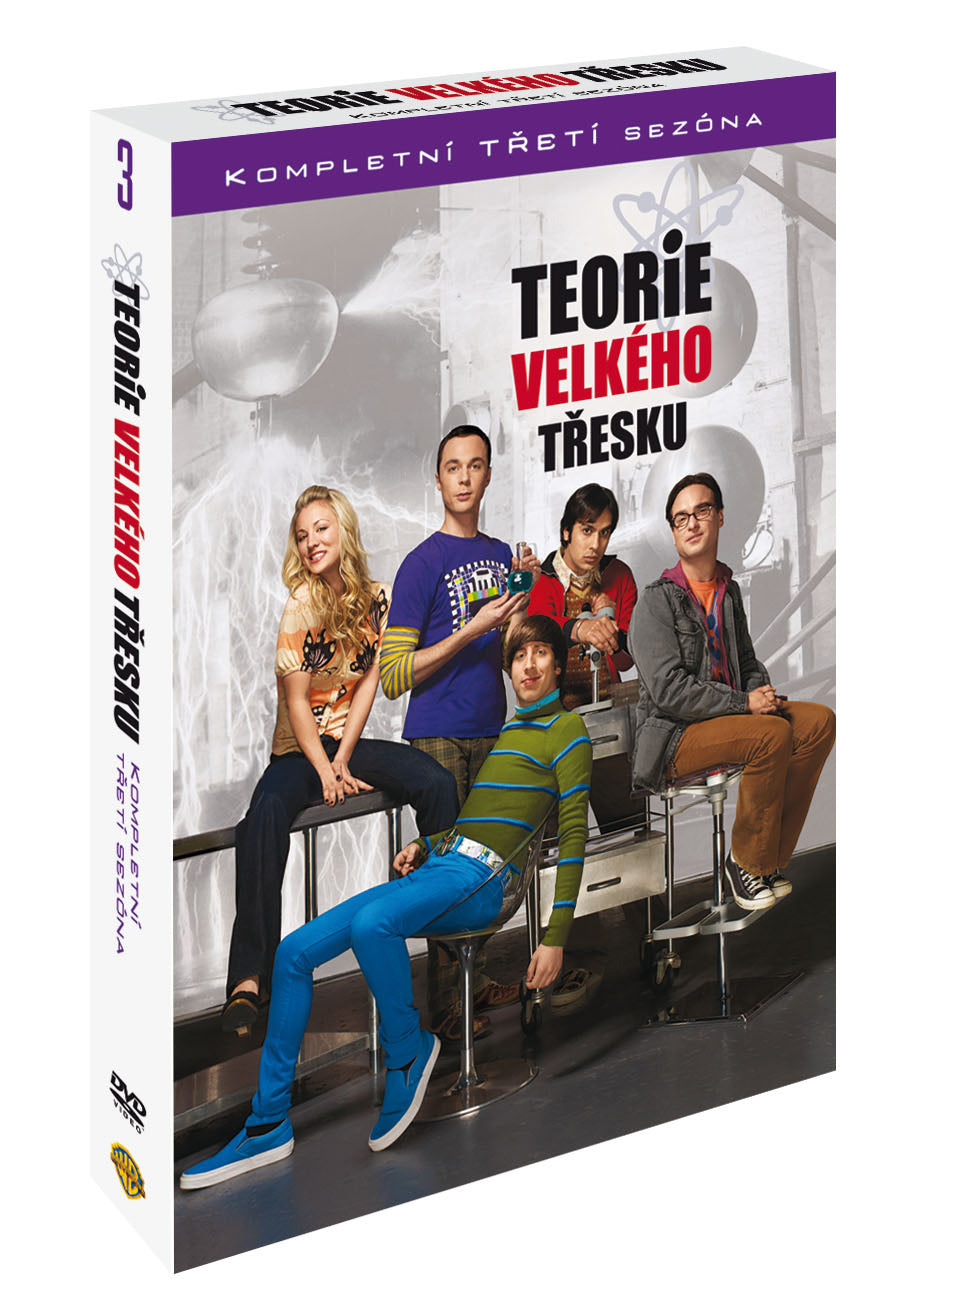 Theory of the 3. Serie 3DVD / Big Bang Theory Staffel 3